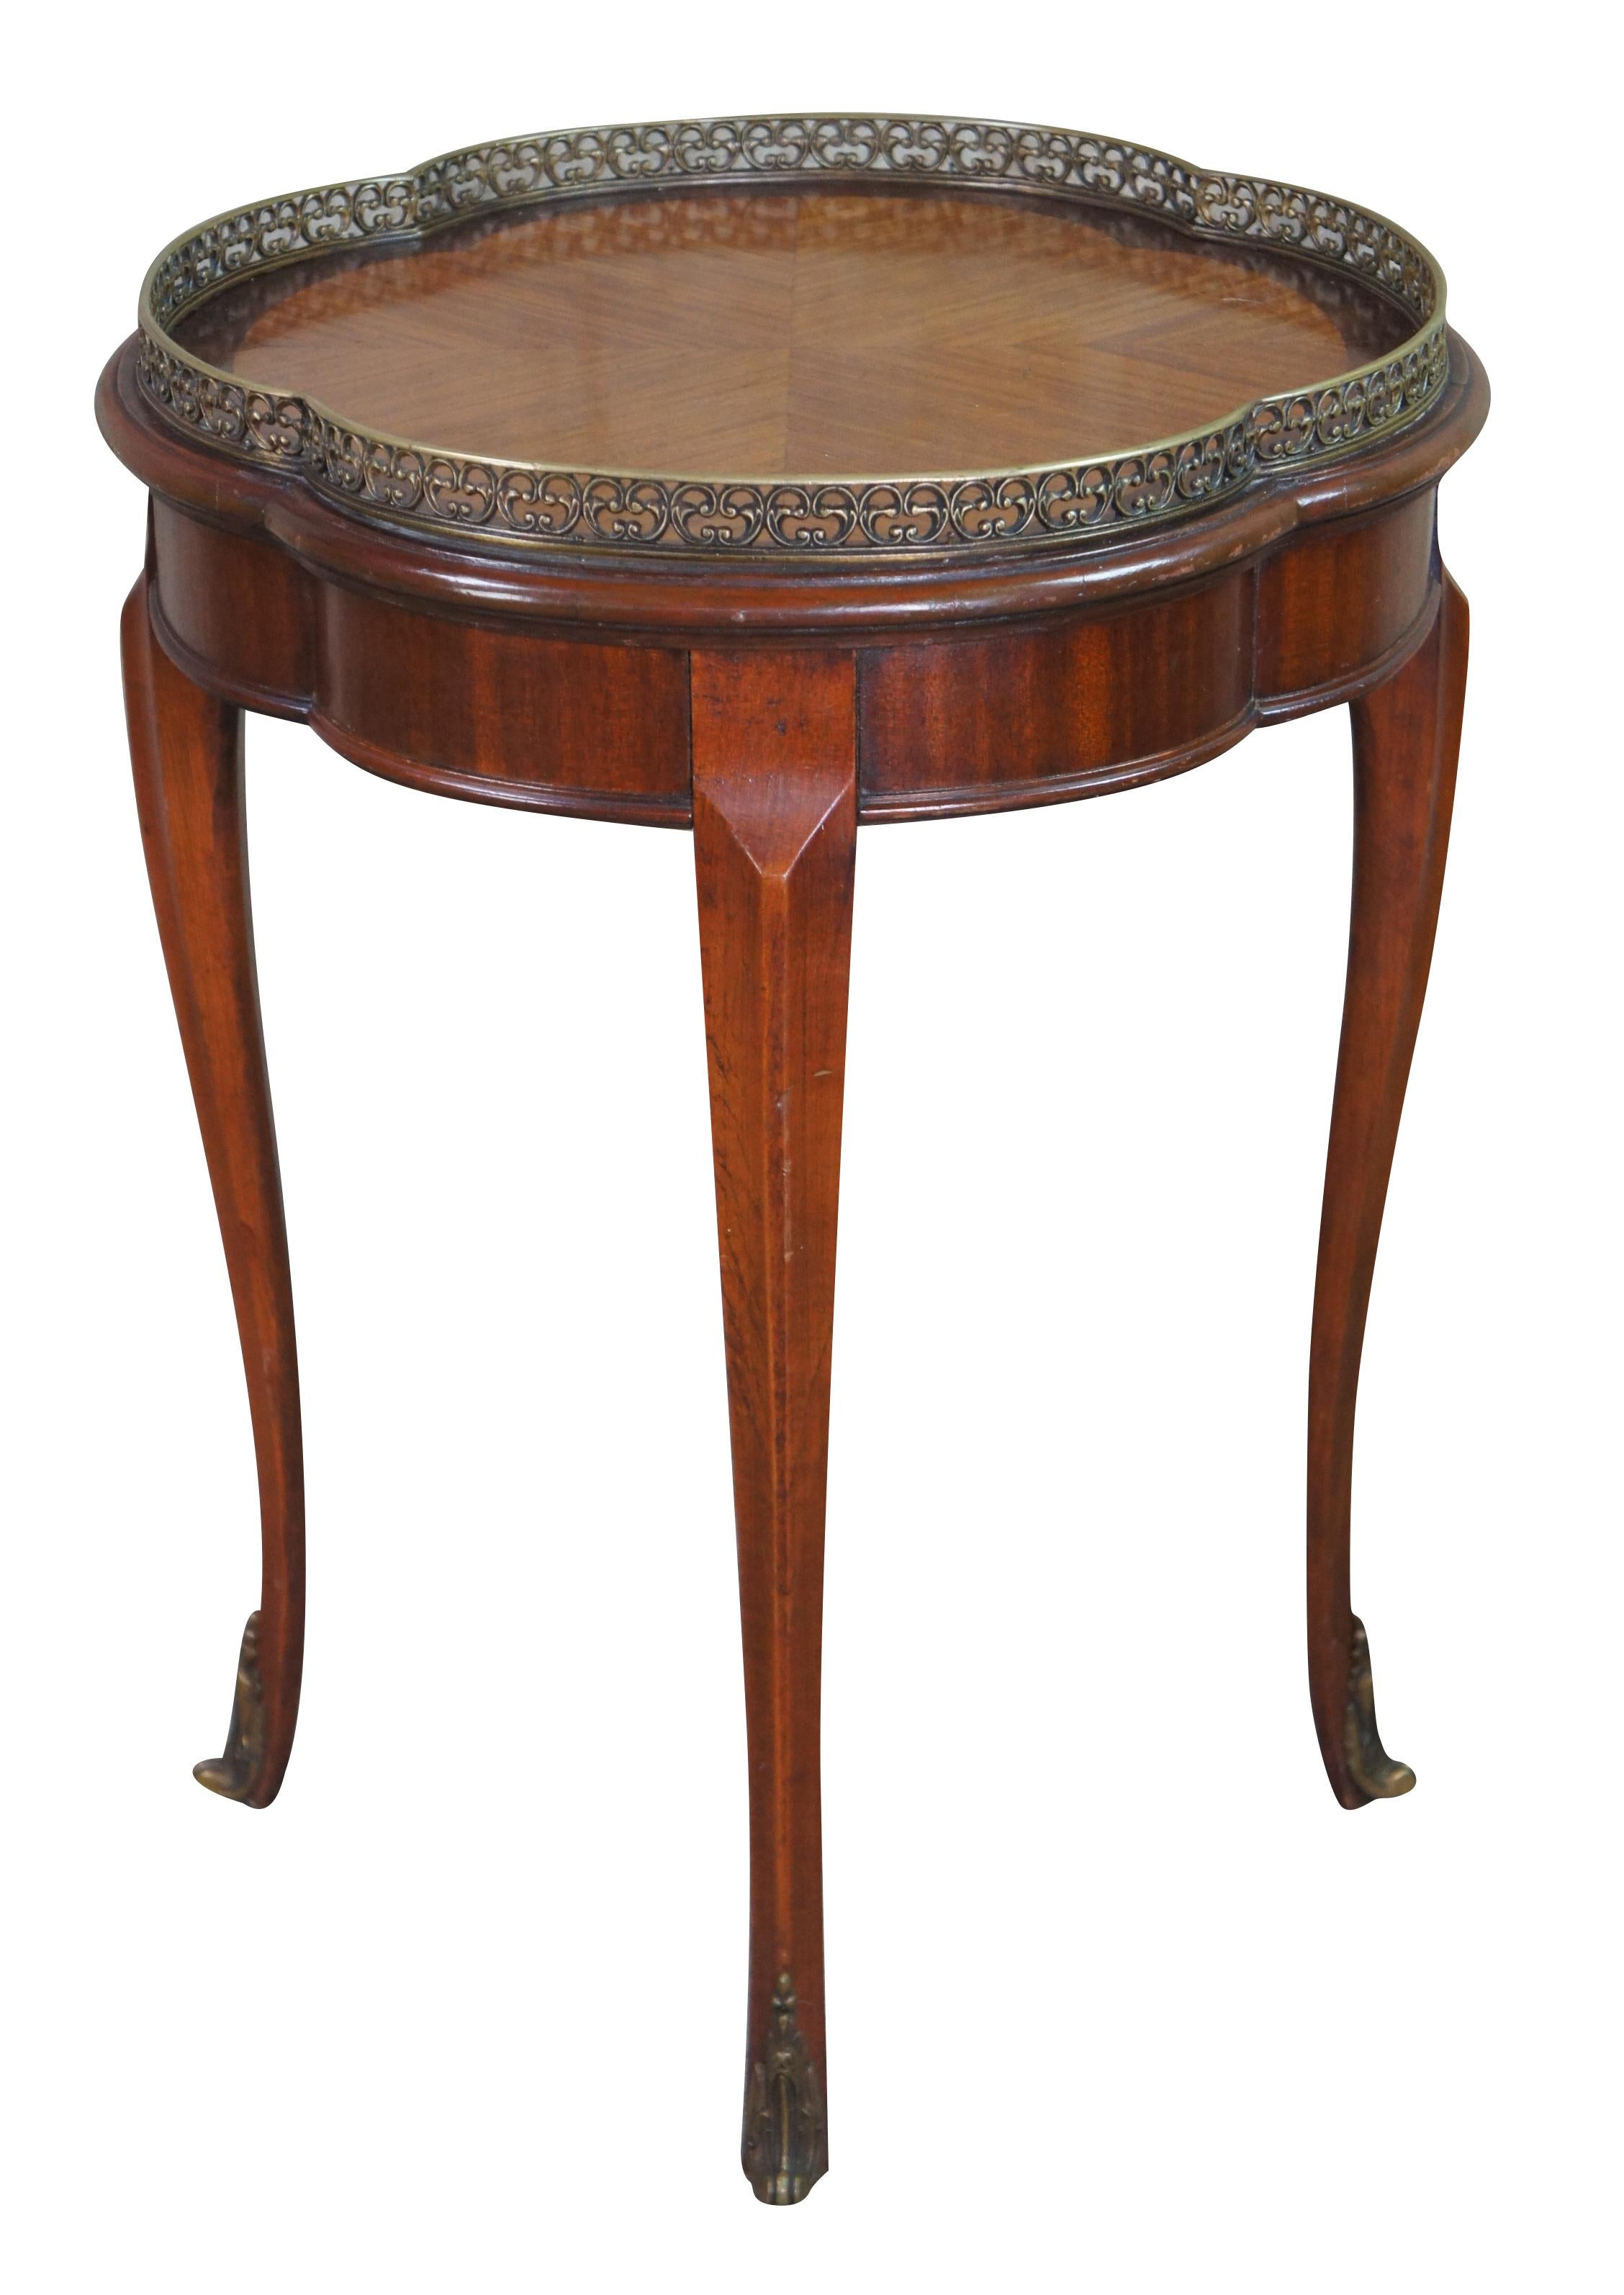 Antique French Louis XV Gueridon or Bouillette table featuring an oval serpentine / clover form with reticulated brass gallery, matchbook top and tapered cabriole legs with brass feet caps.
 